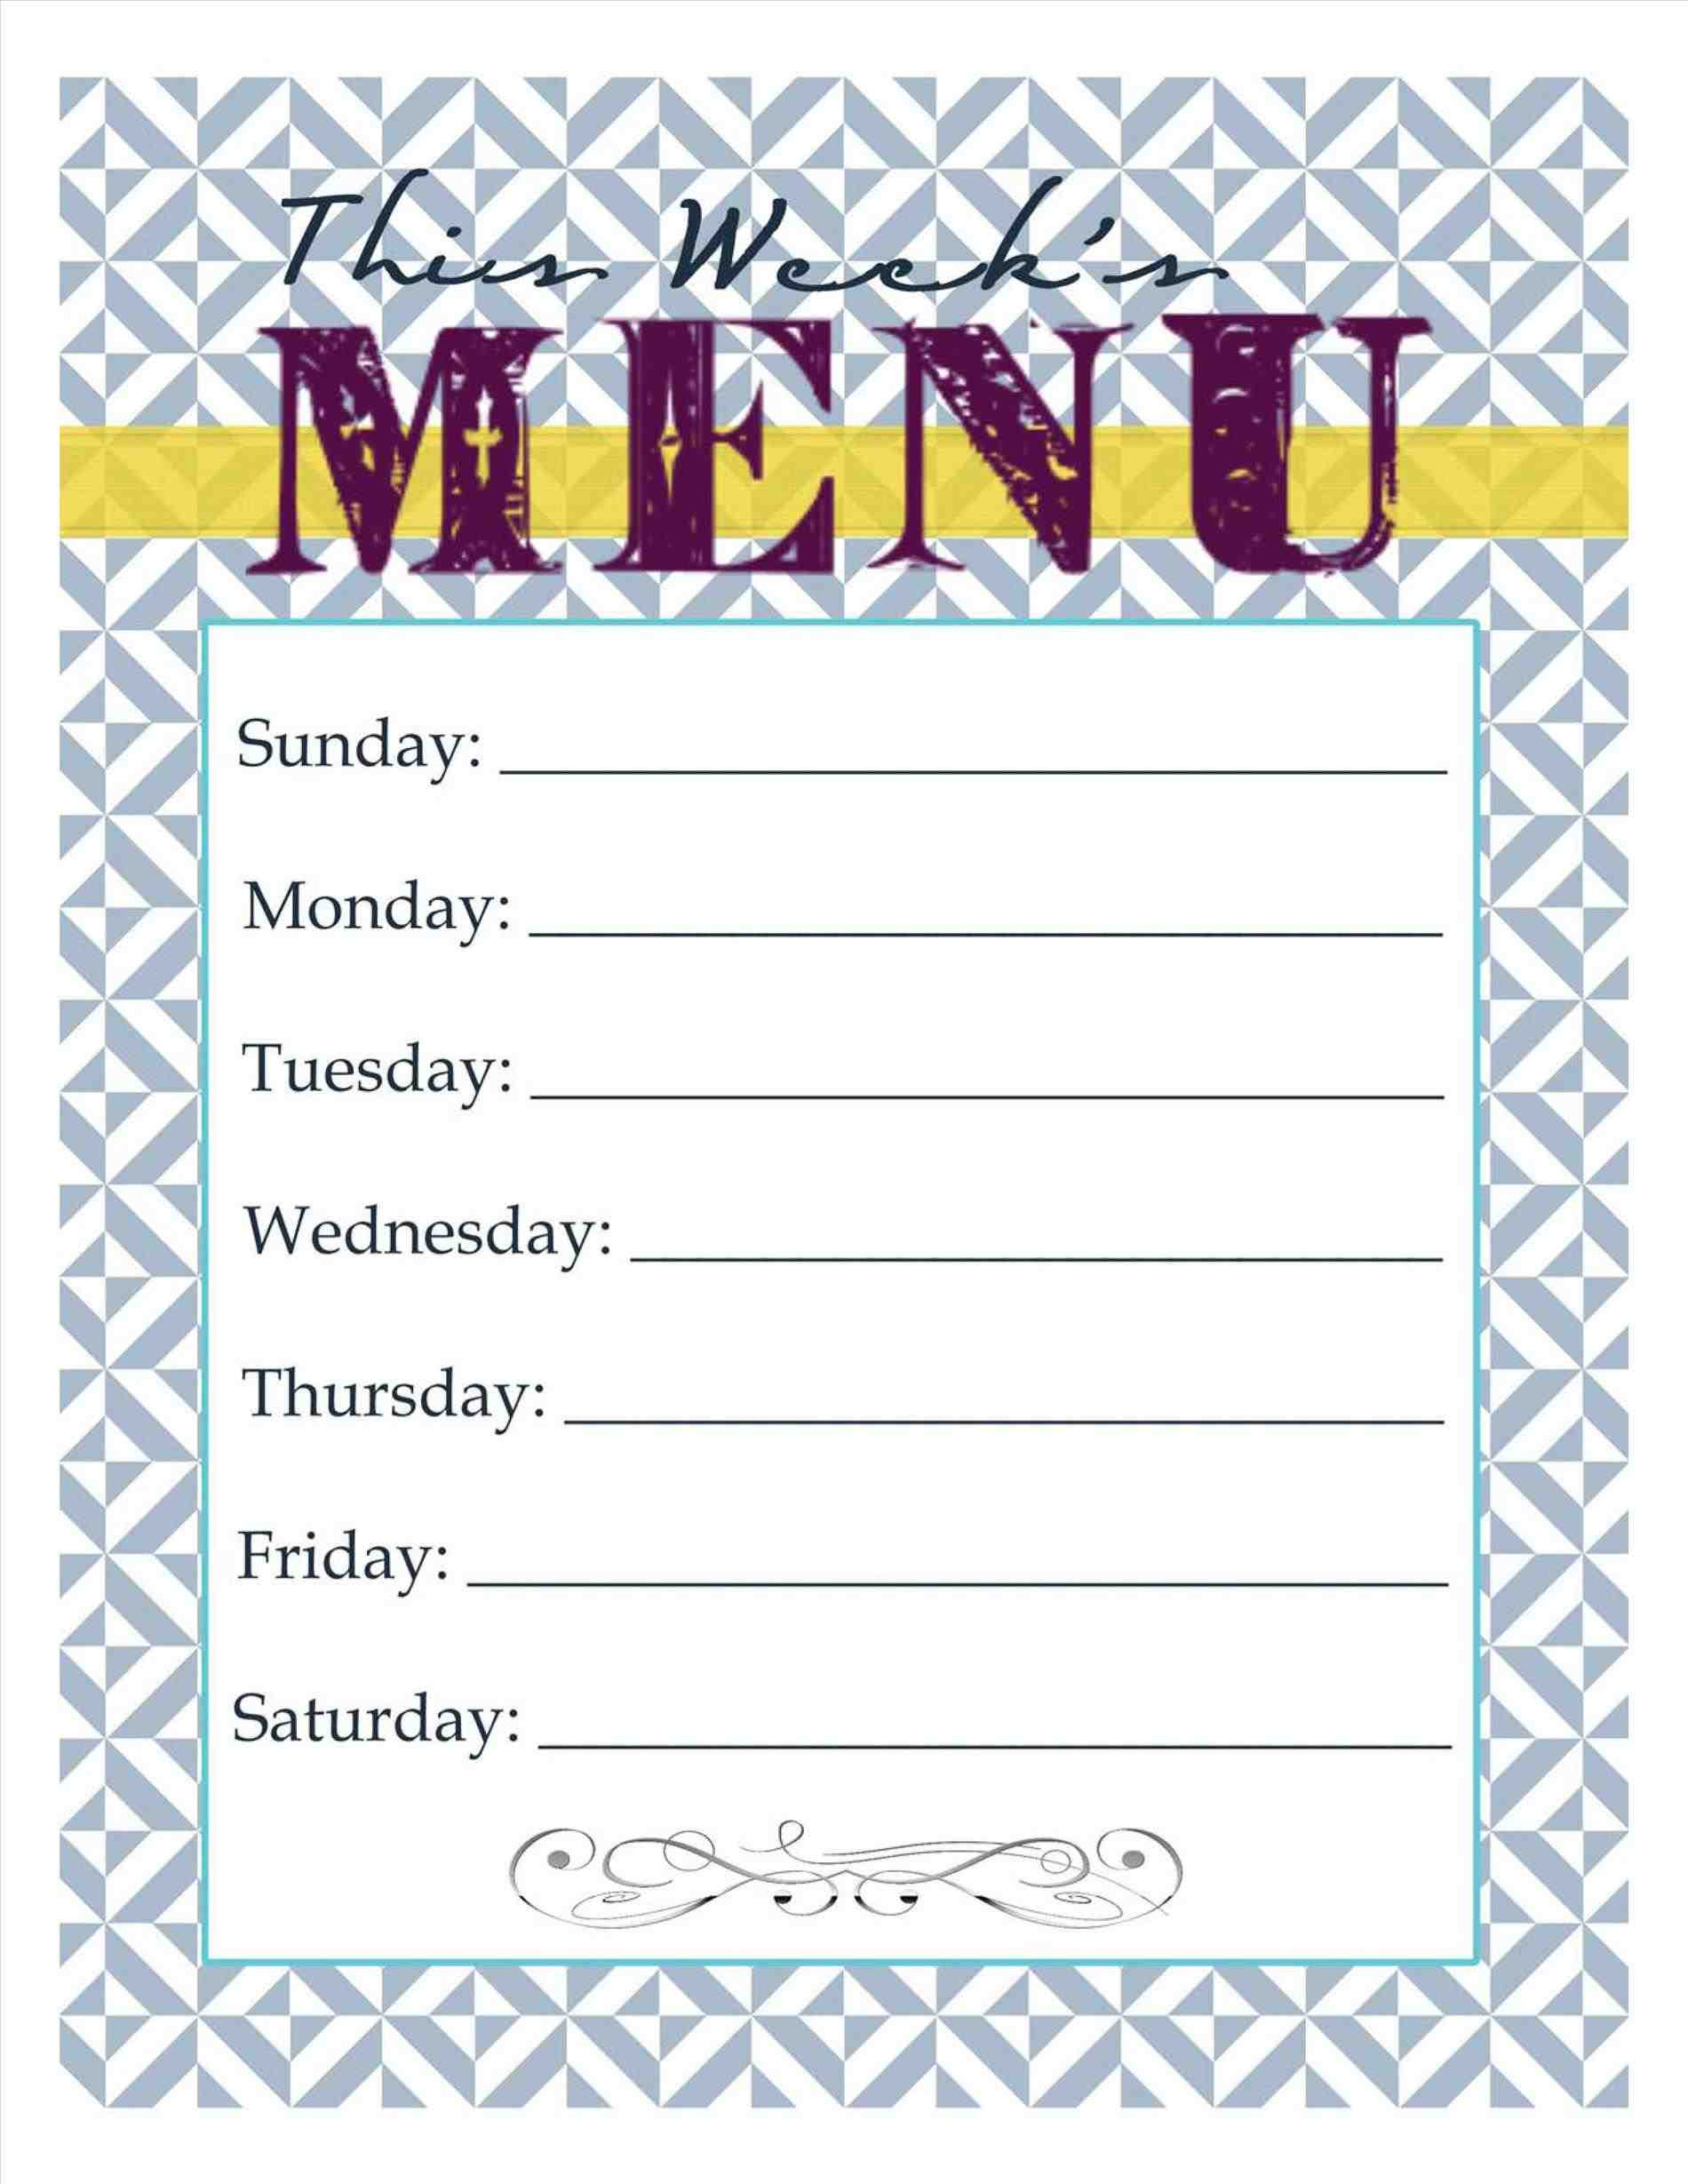 Lunch-Snacks-And-Lunches-Weekly-Plan-Printable-Insssrenterprisesco - Free Printable Menu Templates